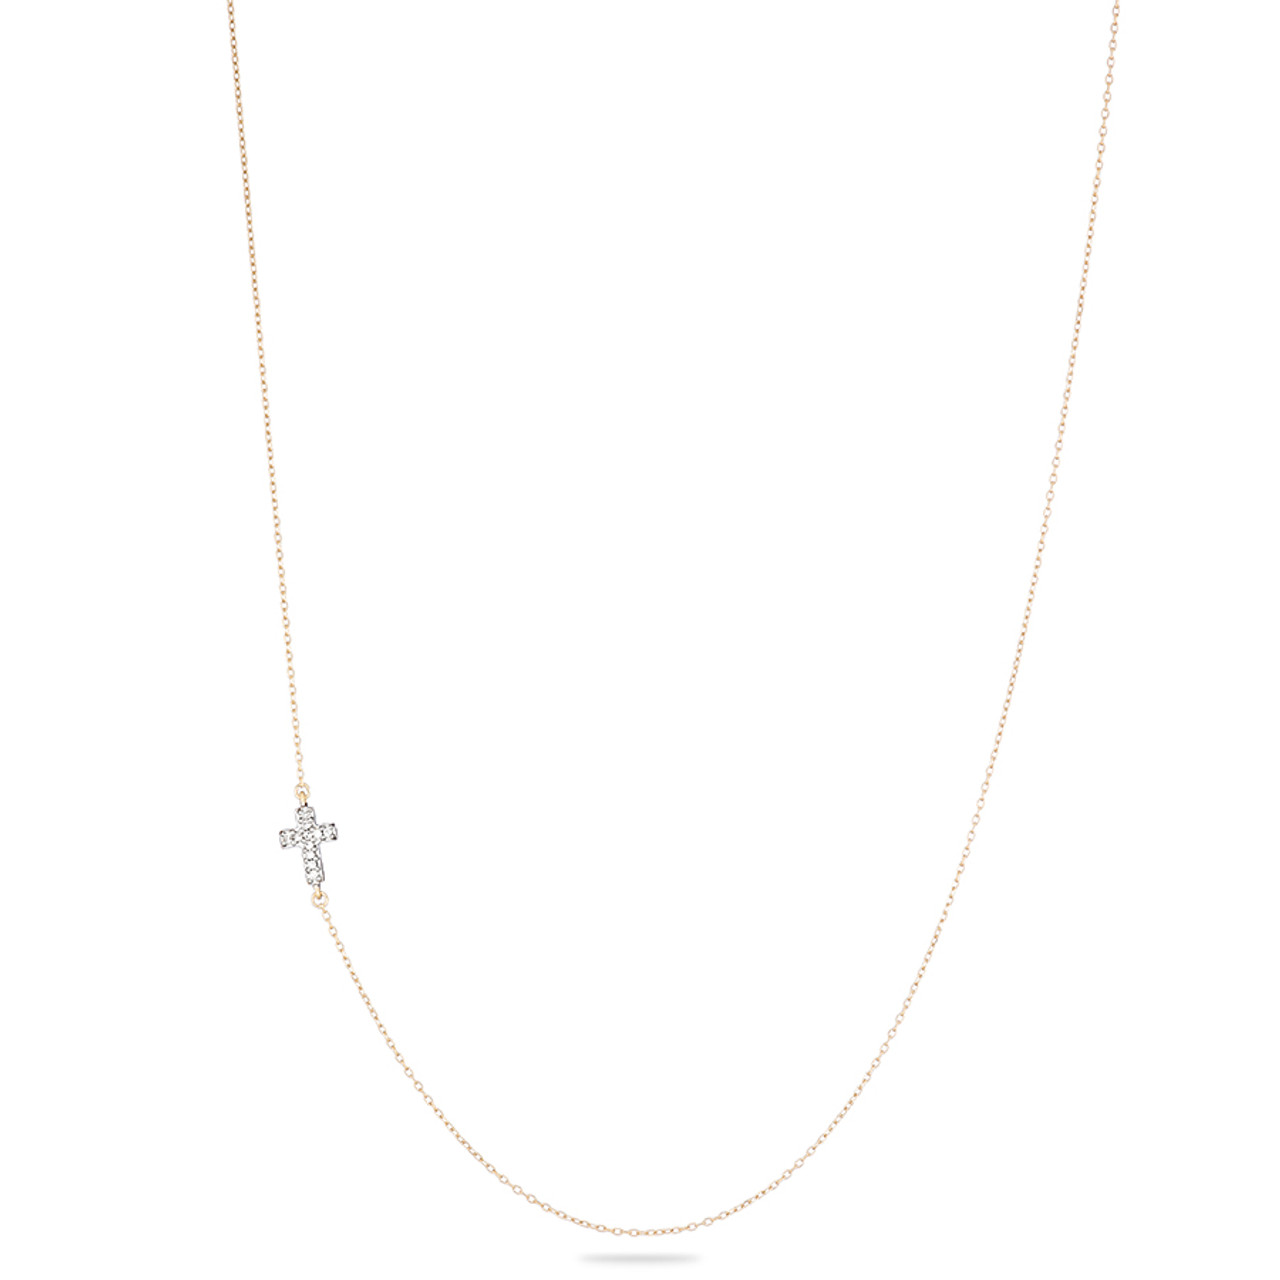 Adina Reyter Solid Pave Cross Necklace | Hearth and Soul